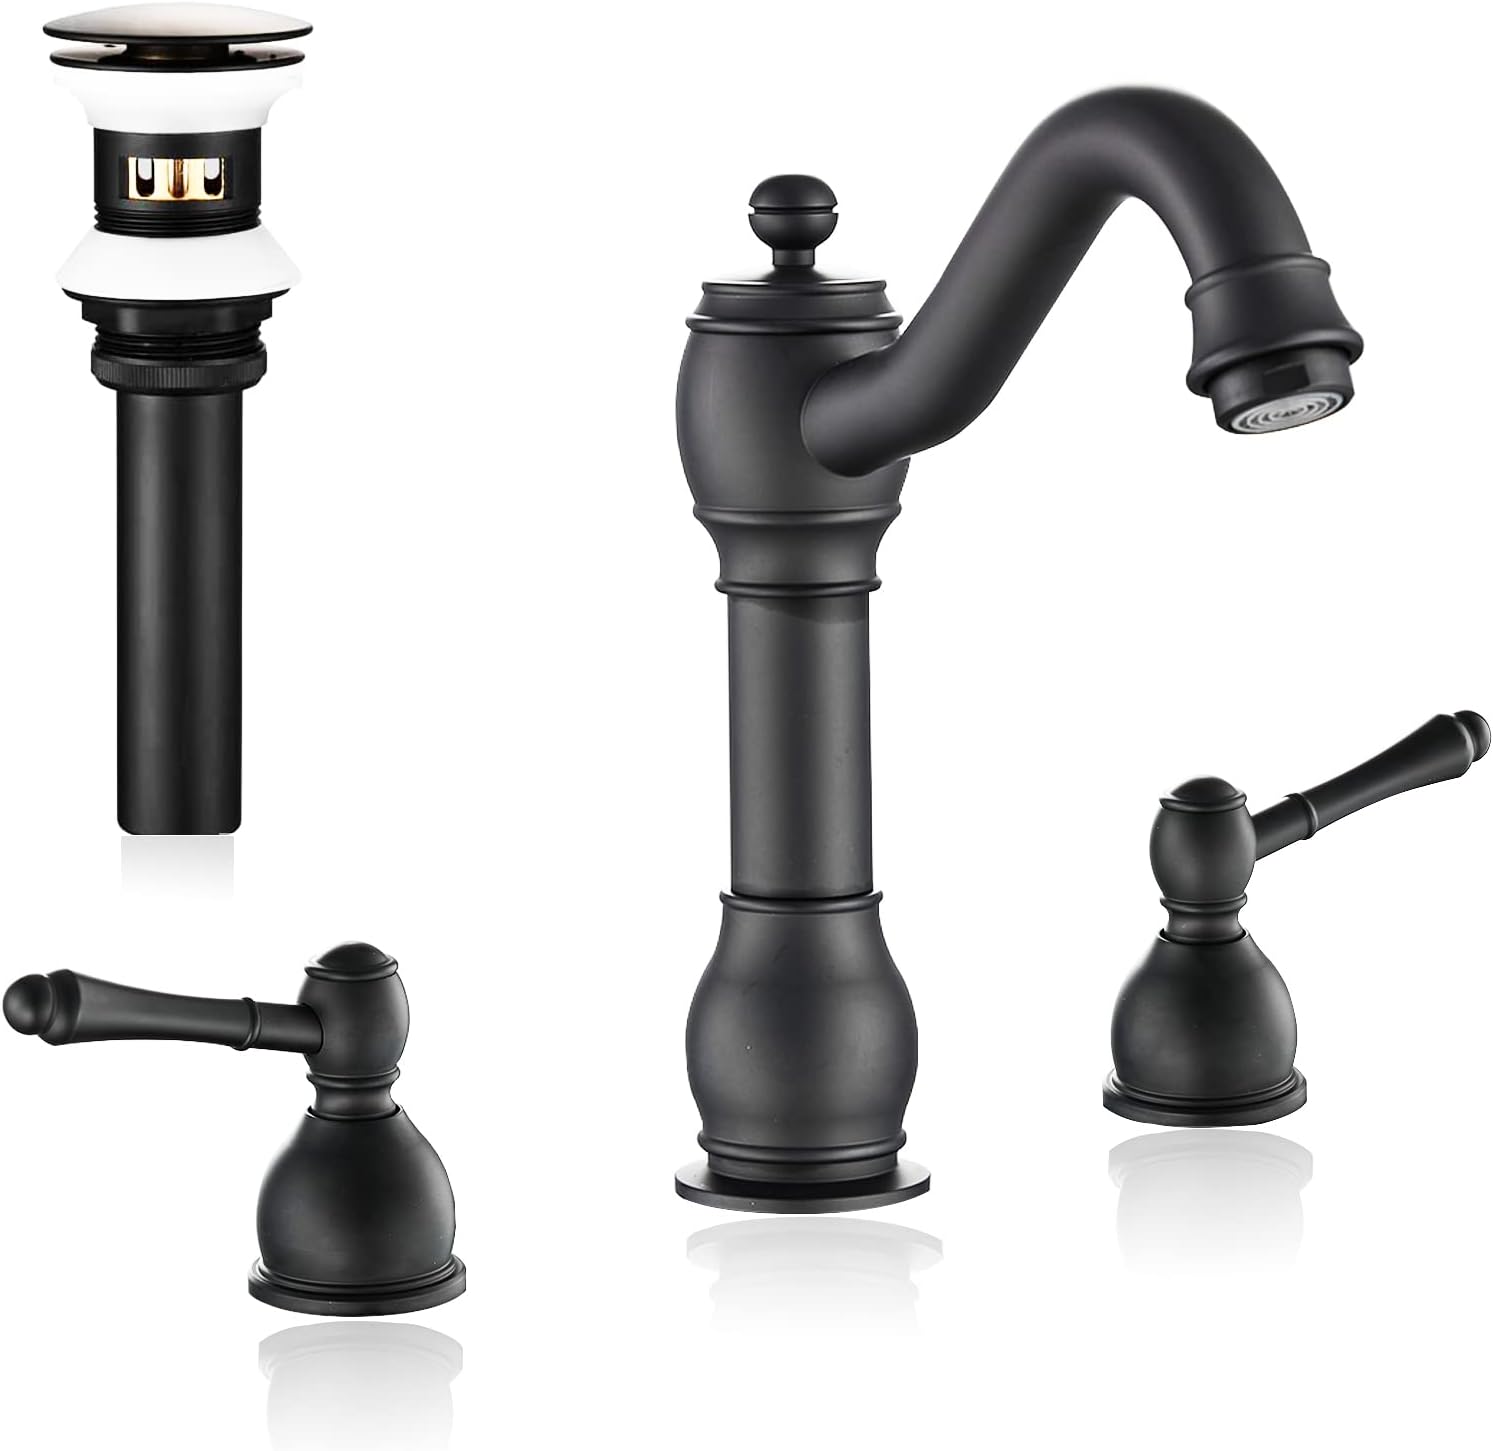 IBOFYY Matte Black Bathroom Sink Faucet, 8inch Two Handle Bathroom Faucet 3 Holes Solid Brass With Metal Pop-Up Drain Assembly (Matte